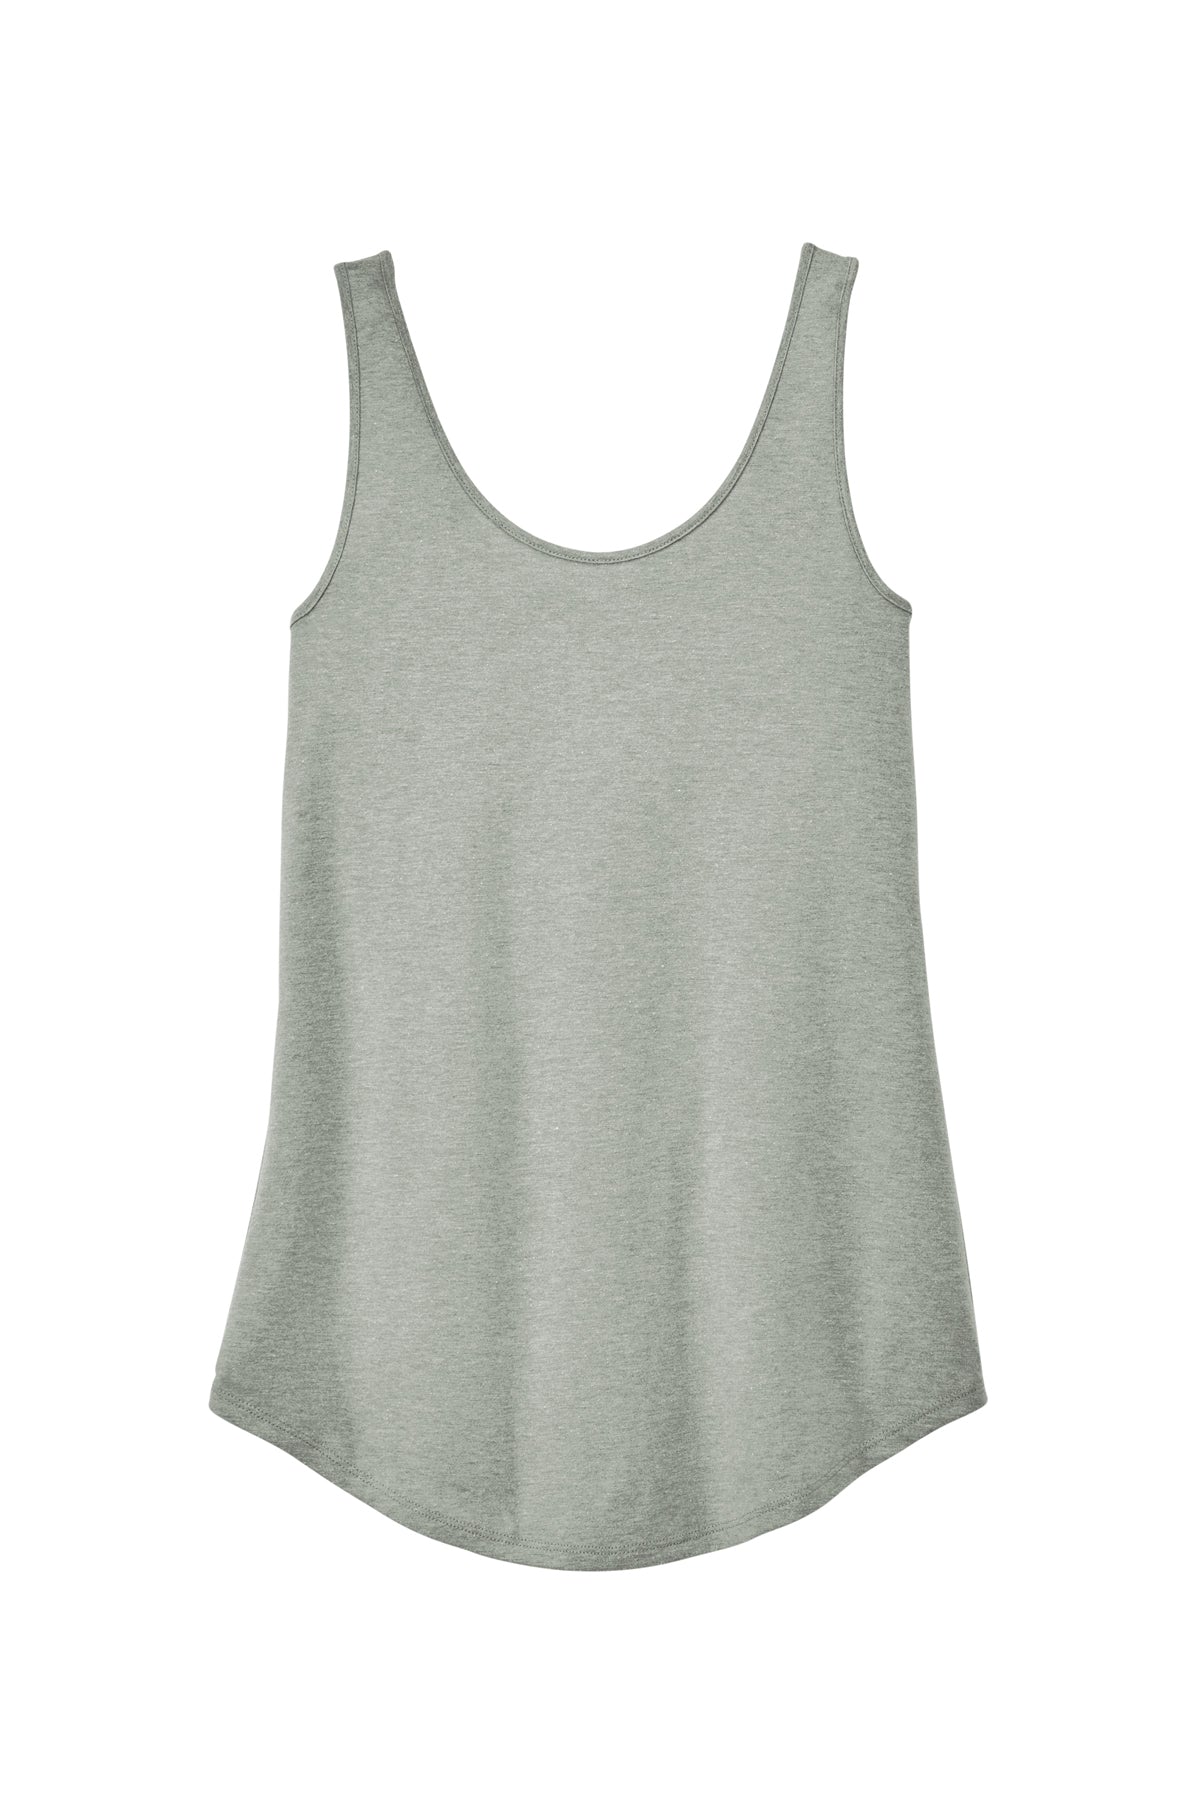 DT151 District® Women’s Perfect Tri® Relaxed Tank